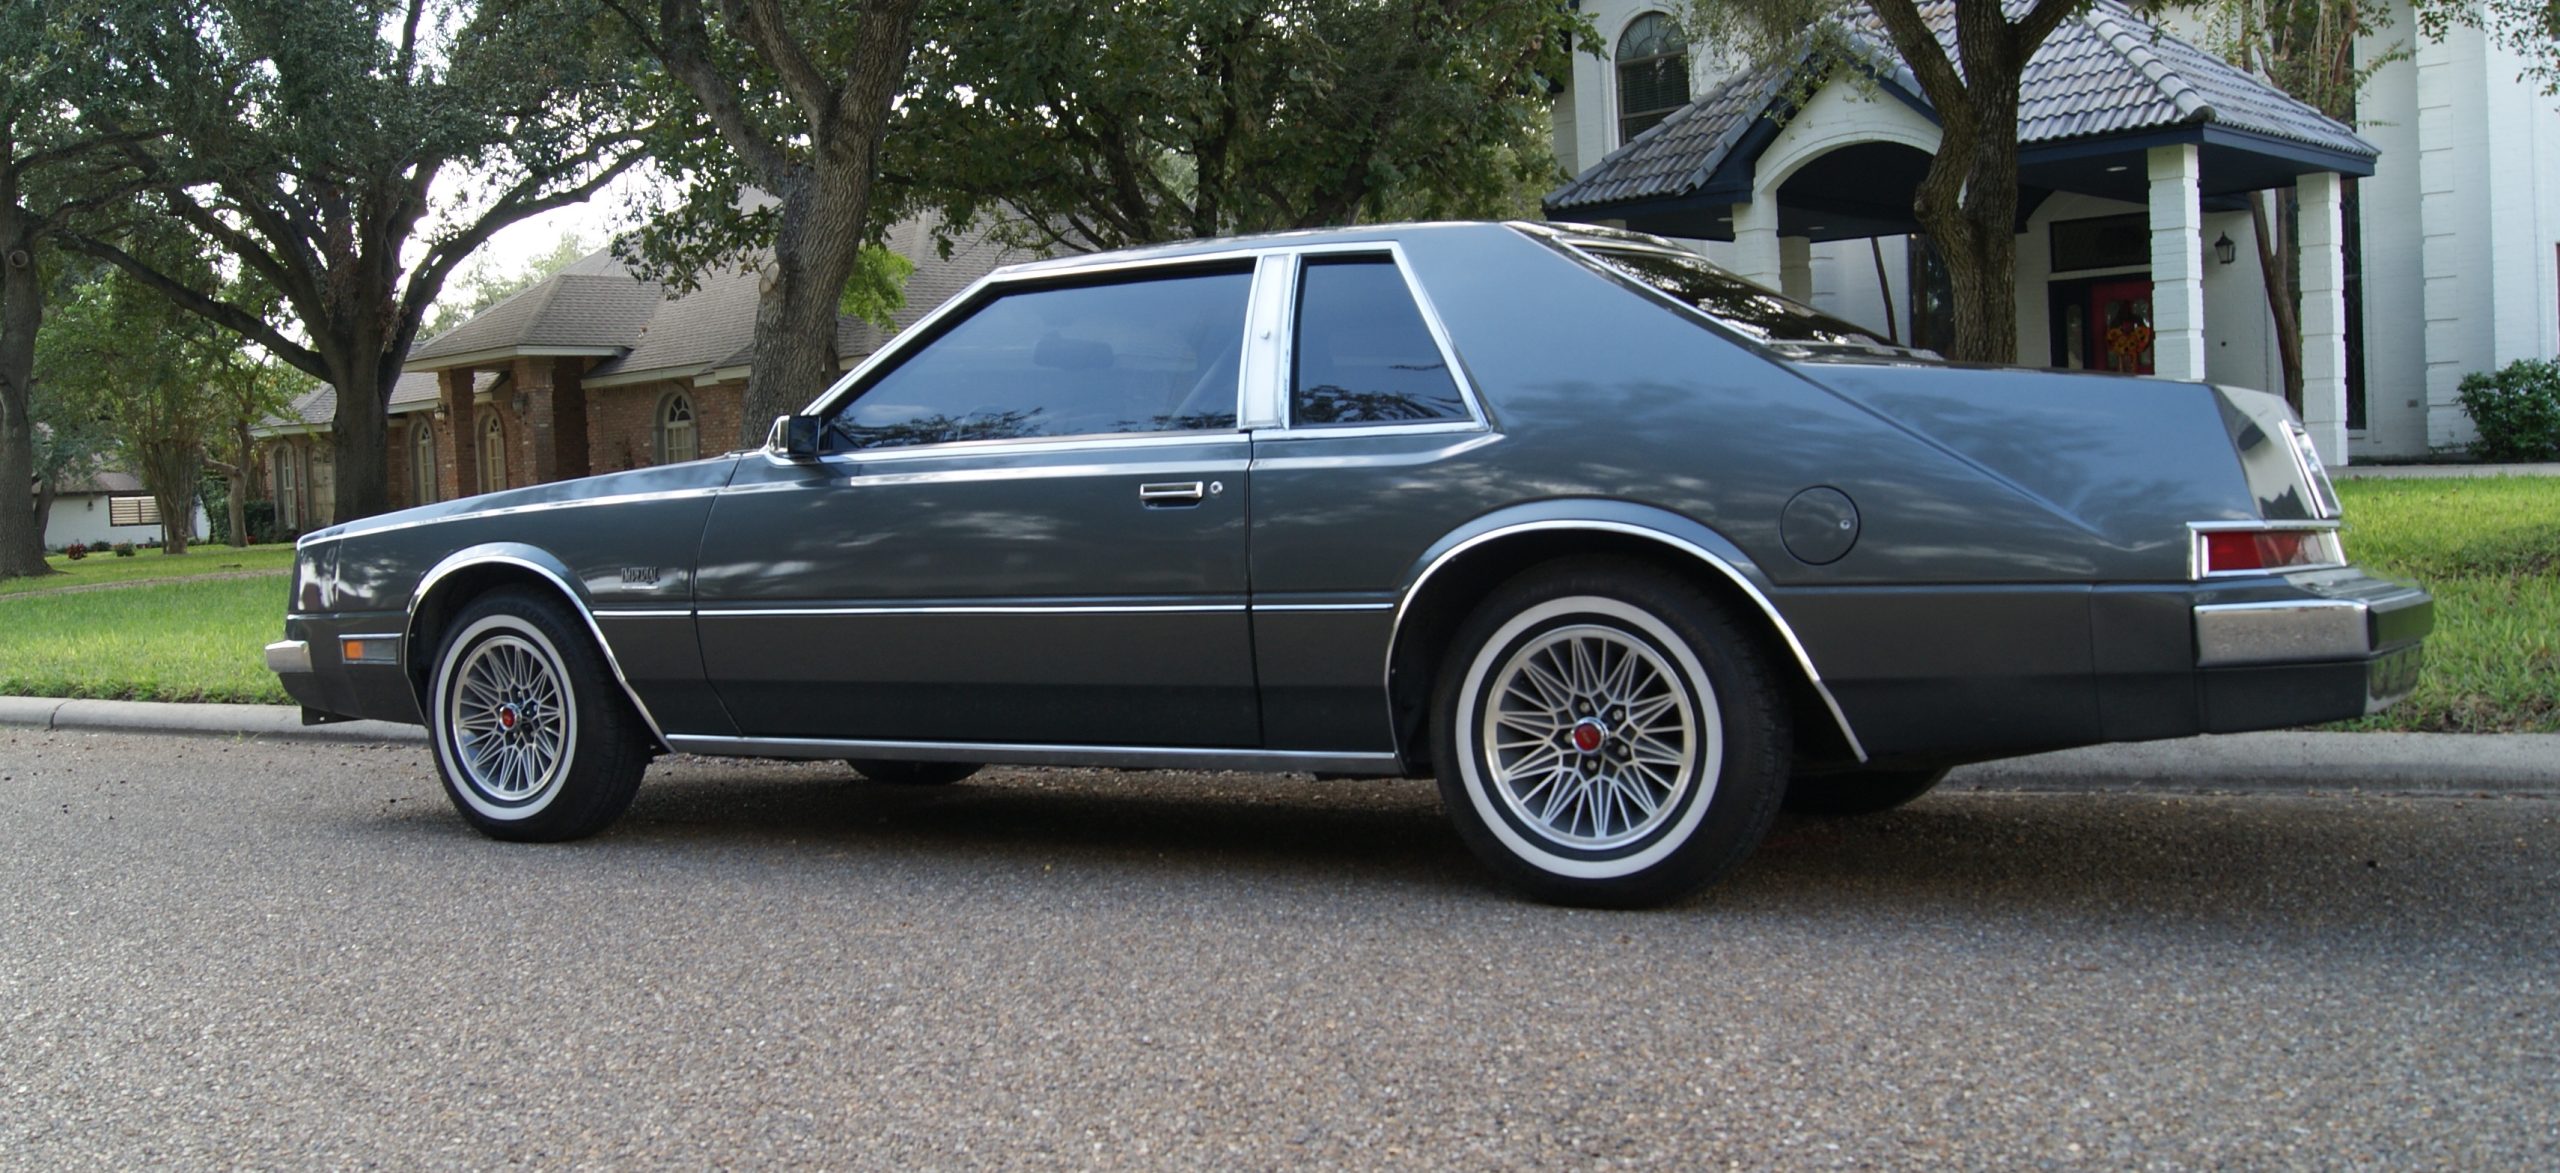 Beautiful 1982 Chrysler Imperial For Sale